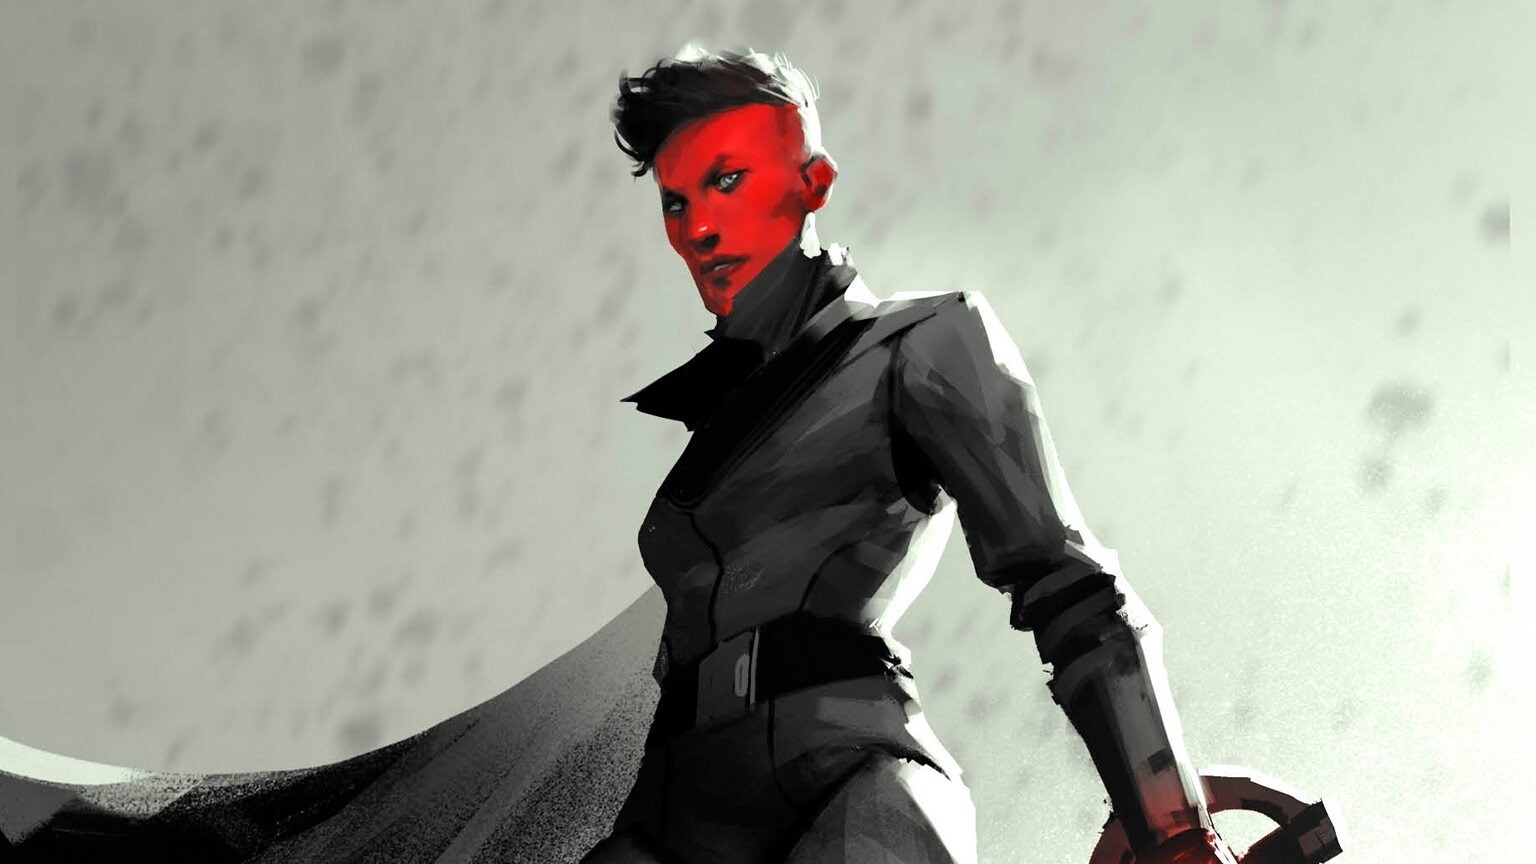 NYCC 2022: Rise of the Red Blade Inquisitor Novel Revealed, and More Highlights from the Lucasfilm Publishing Panel